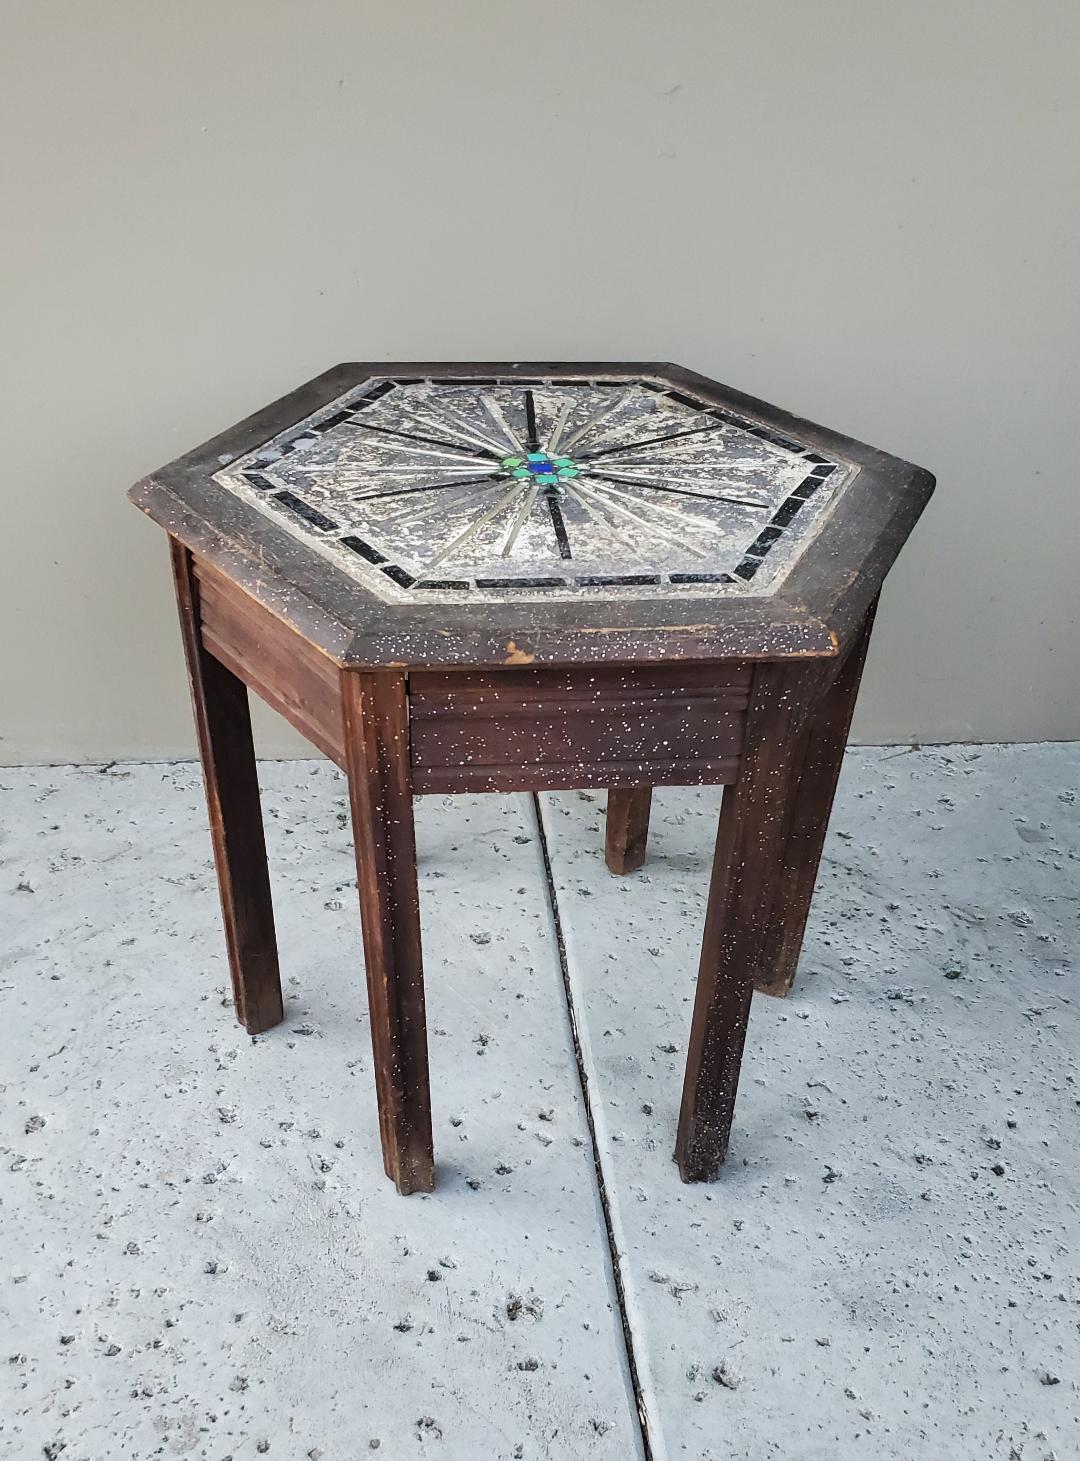 Antique Hexagon Mosaic Oak Side Table Wabi Sabi. 
Wabi Sabi Can Be Seen In This Awesome Table, For The Definition Of Wabi Sabi Means To See The Beauty In Imperfection And To Appreciate The Simplicity, And Accept That Change Is Inevitable.
As You Can